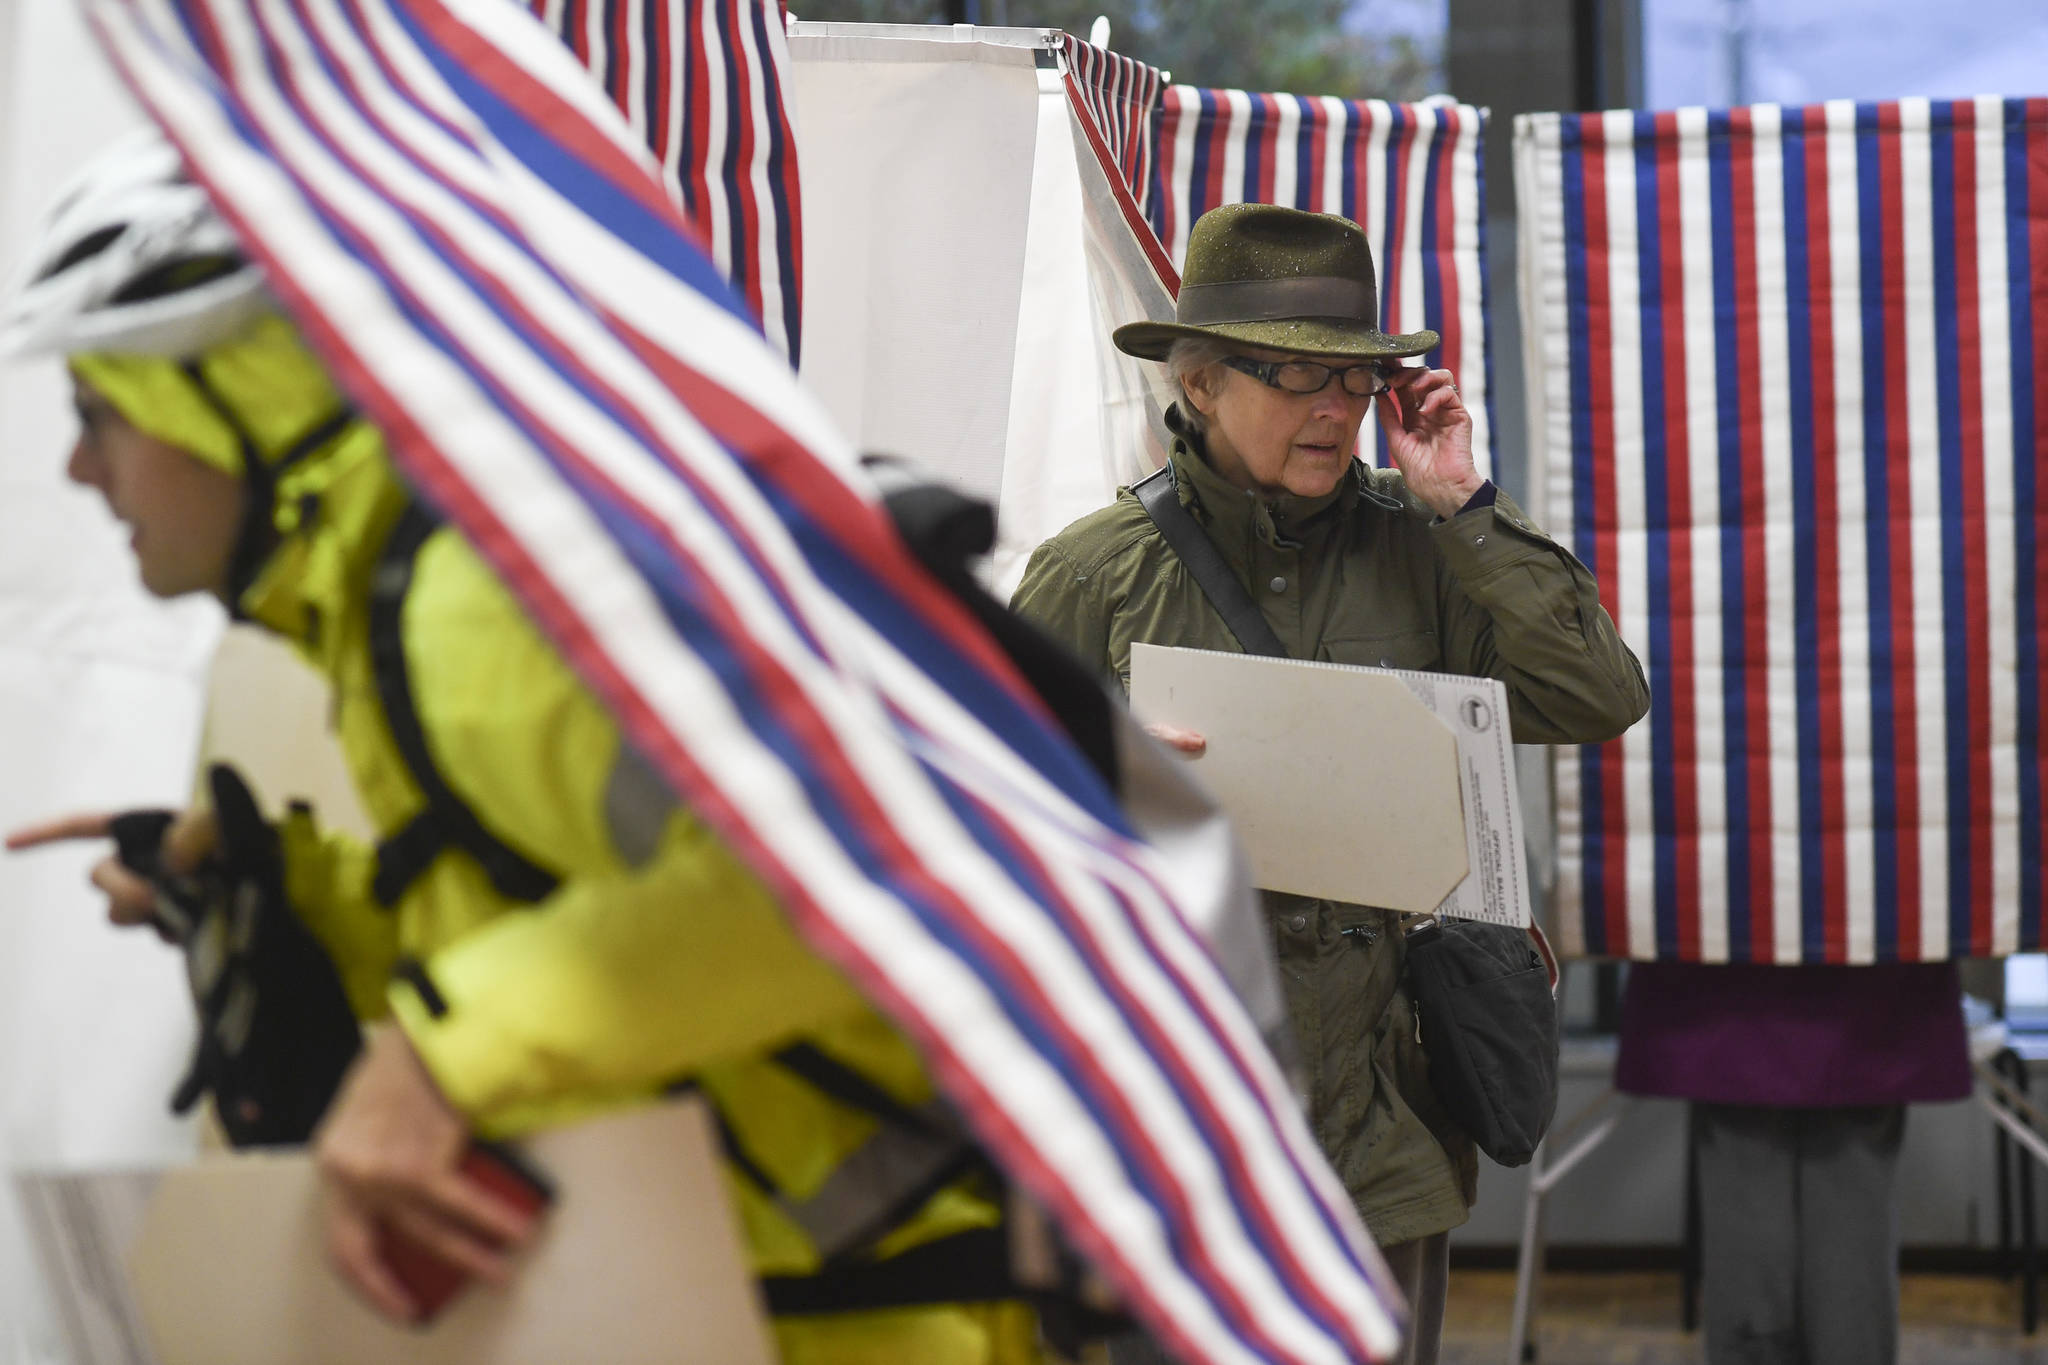 Ben Williams enters a voting booth as Suzanne Williams exits after voting at the Douglas Public Library on Tuesday, Oct. 1, 2019. (Michael Penn | Juneau Empire)